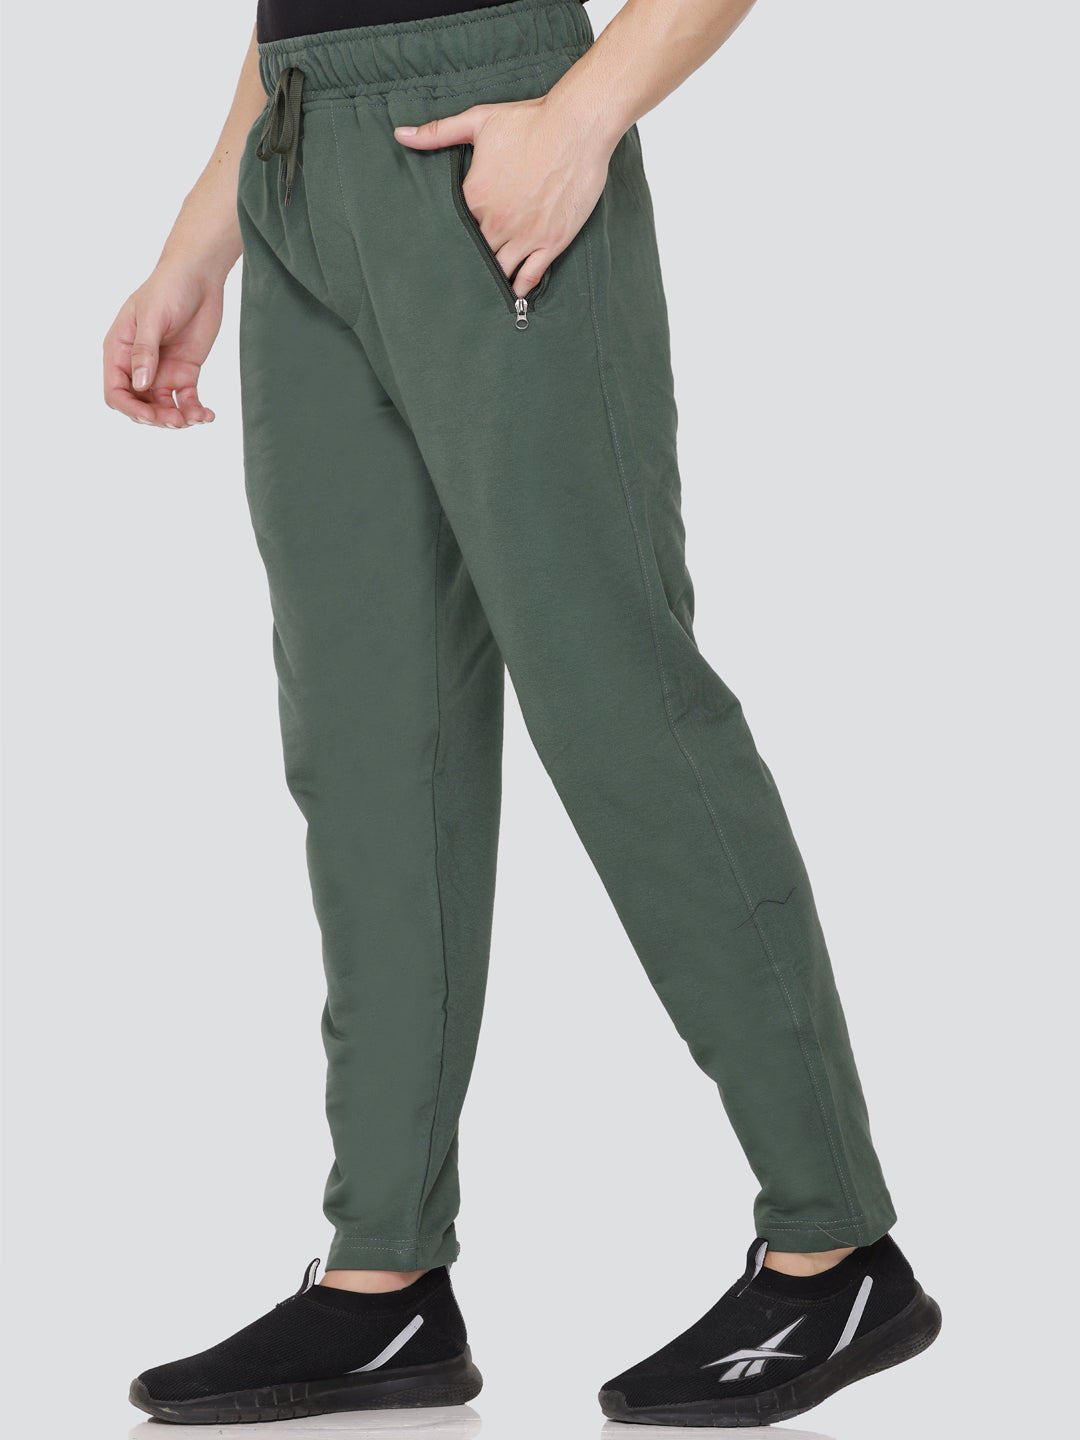 Buy Comfortable Olive Jinxer Plus Size Cotton Trackpants for Men